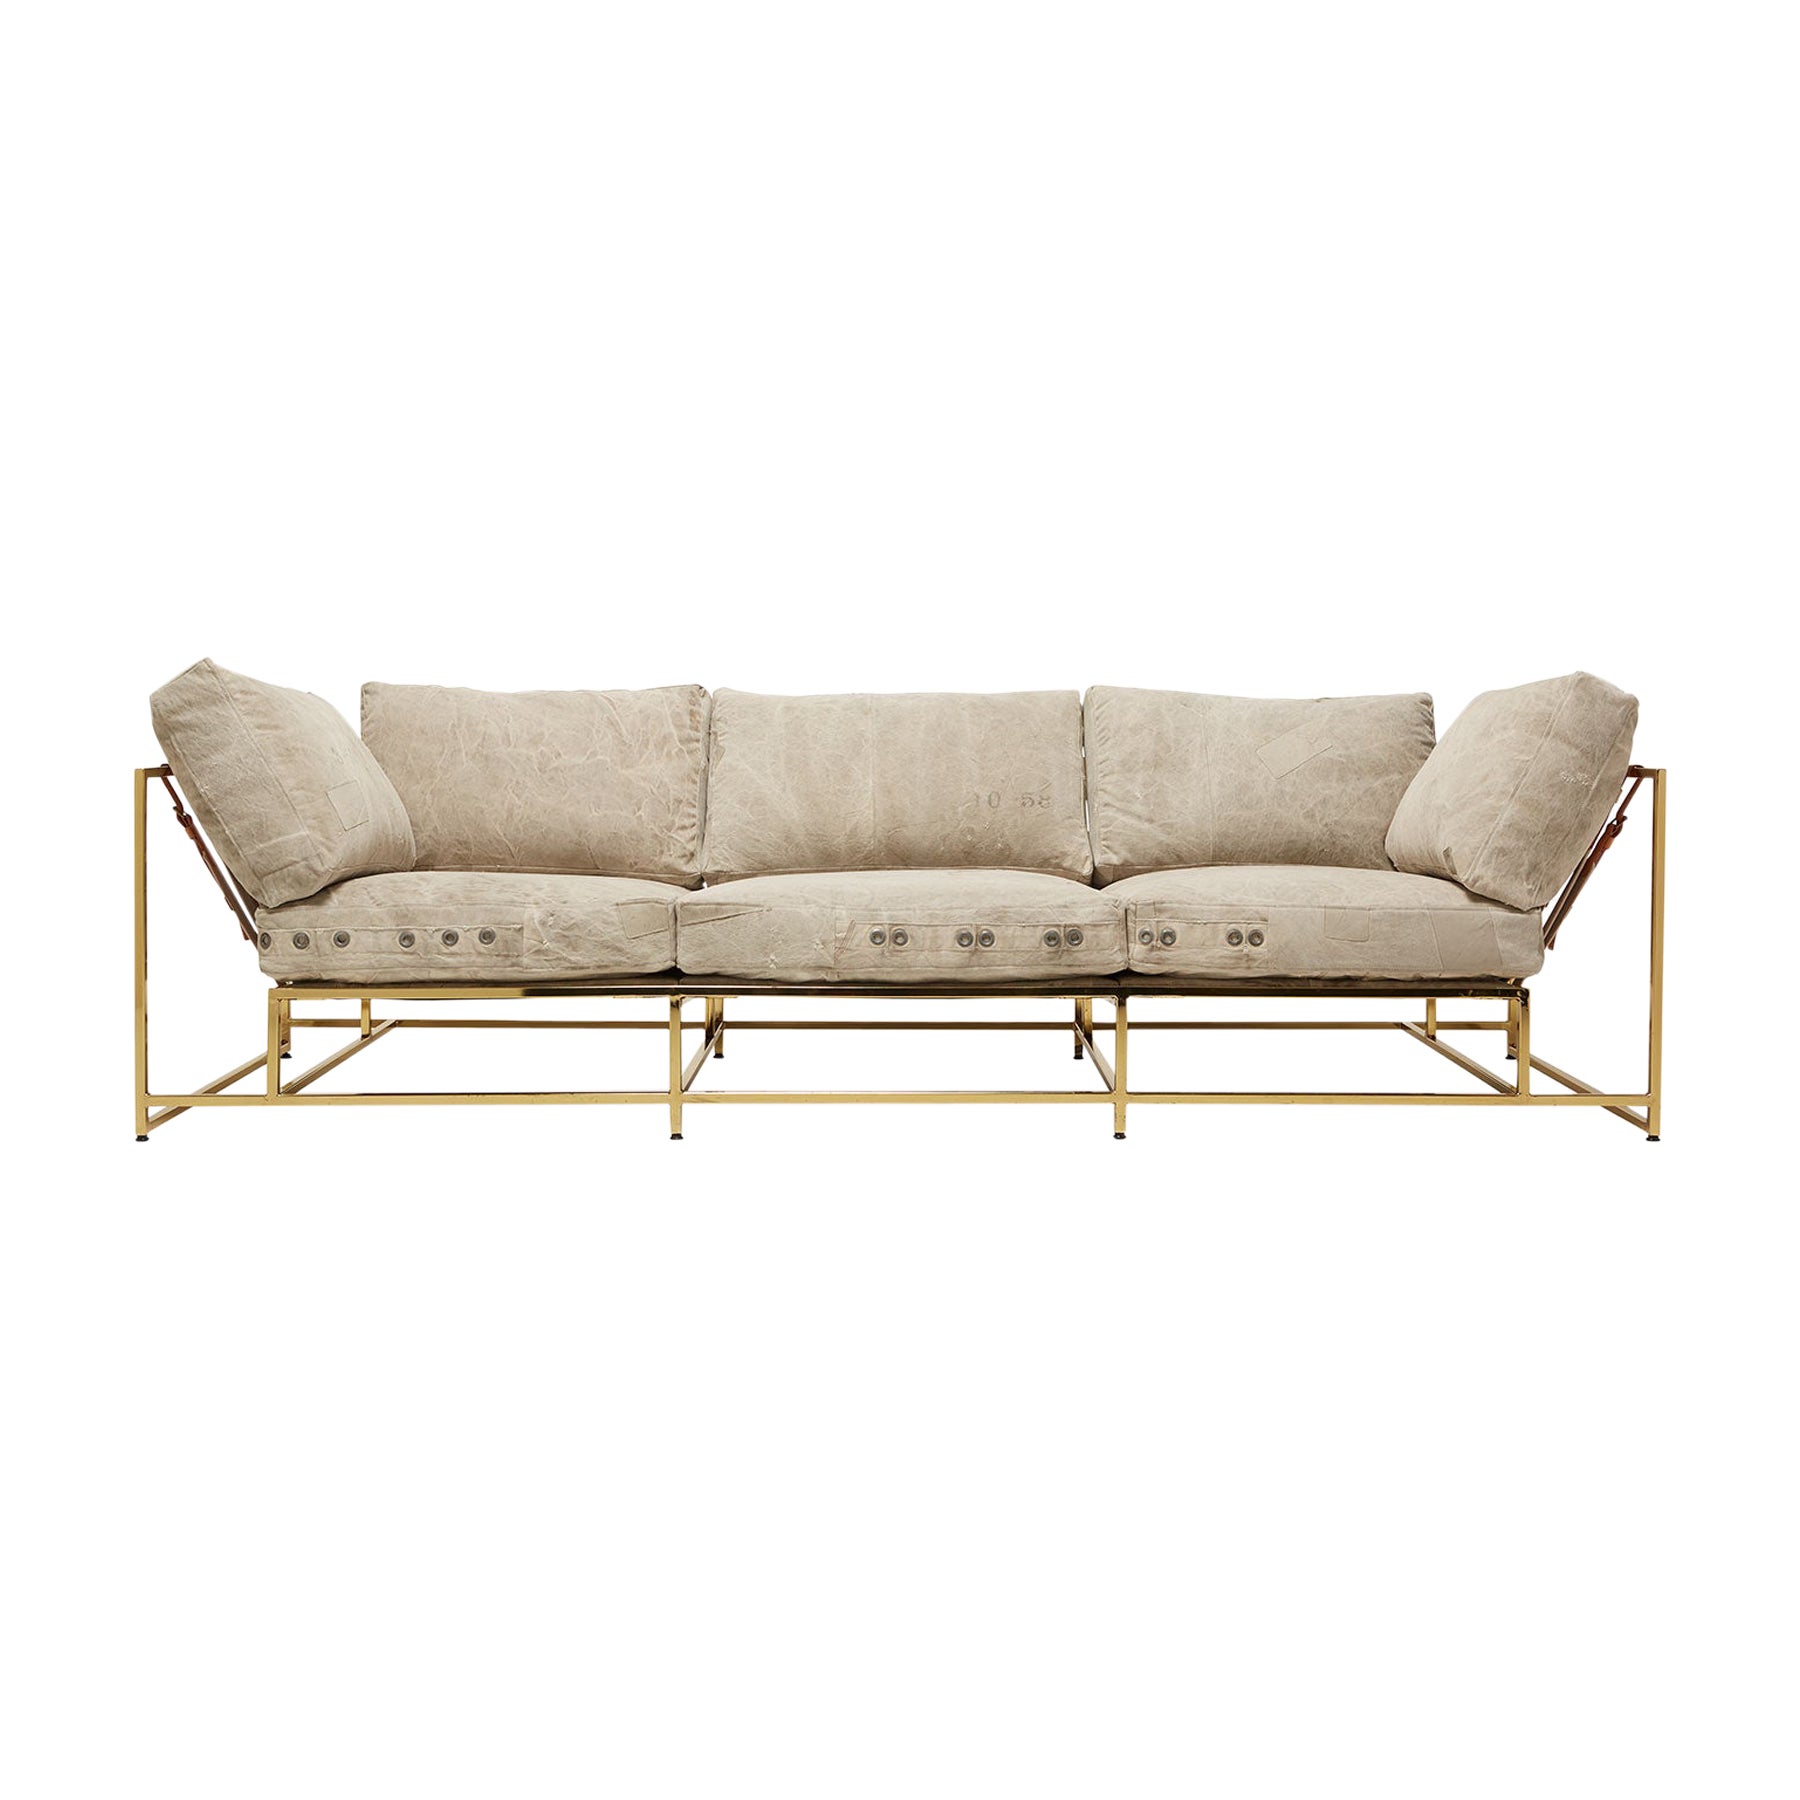 US Mailbag Canvas & Polished Brass Sofa For Sale